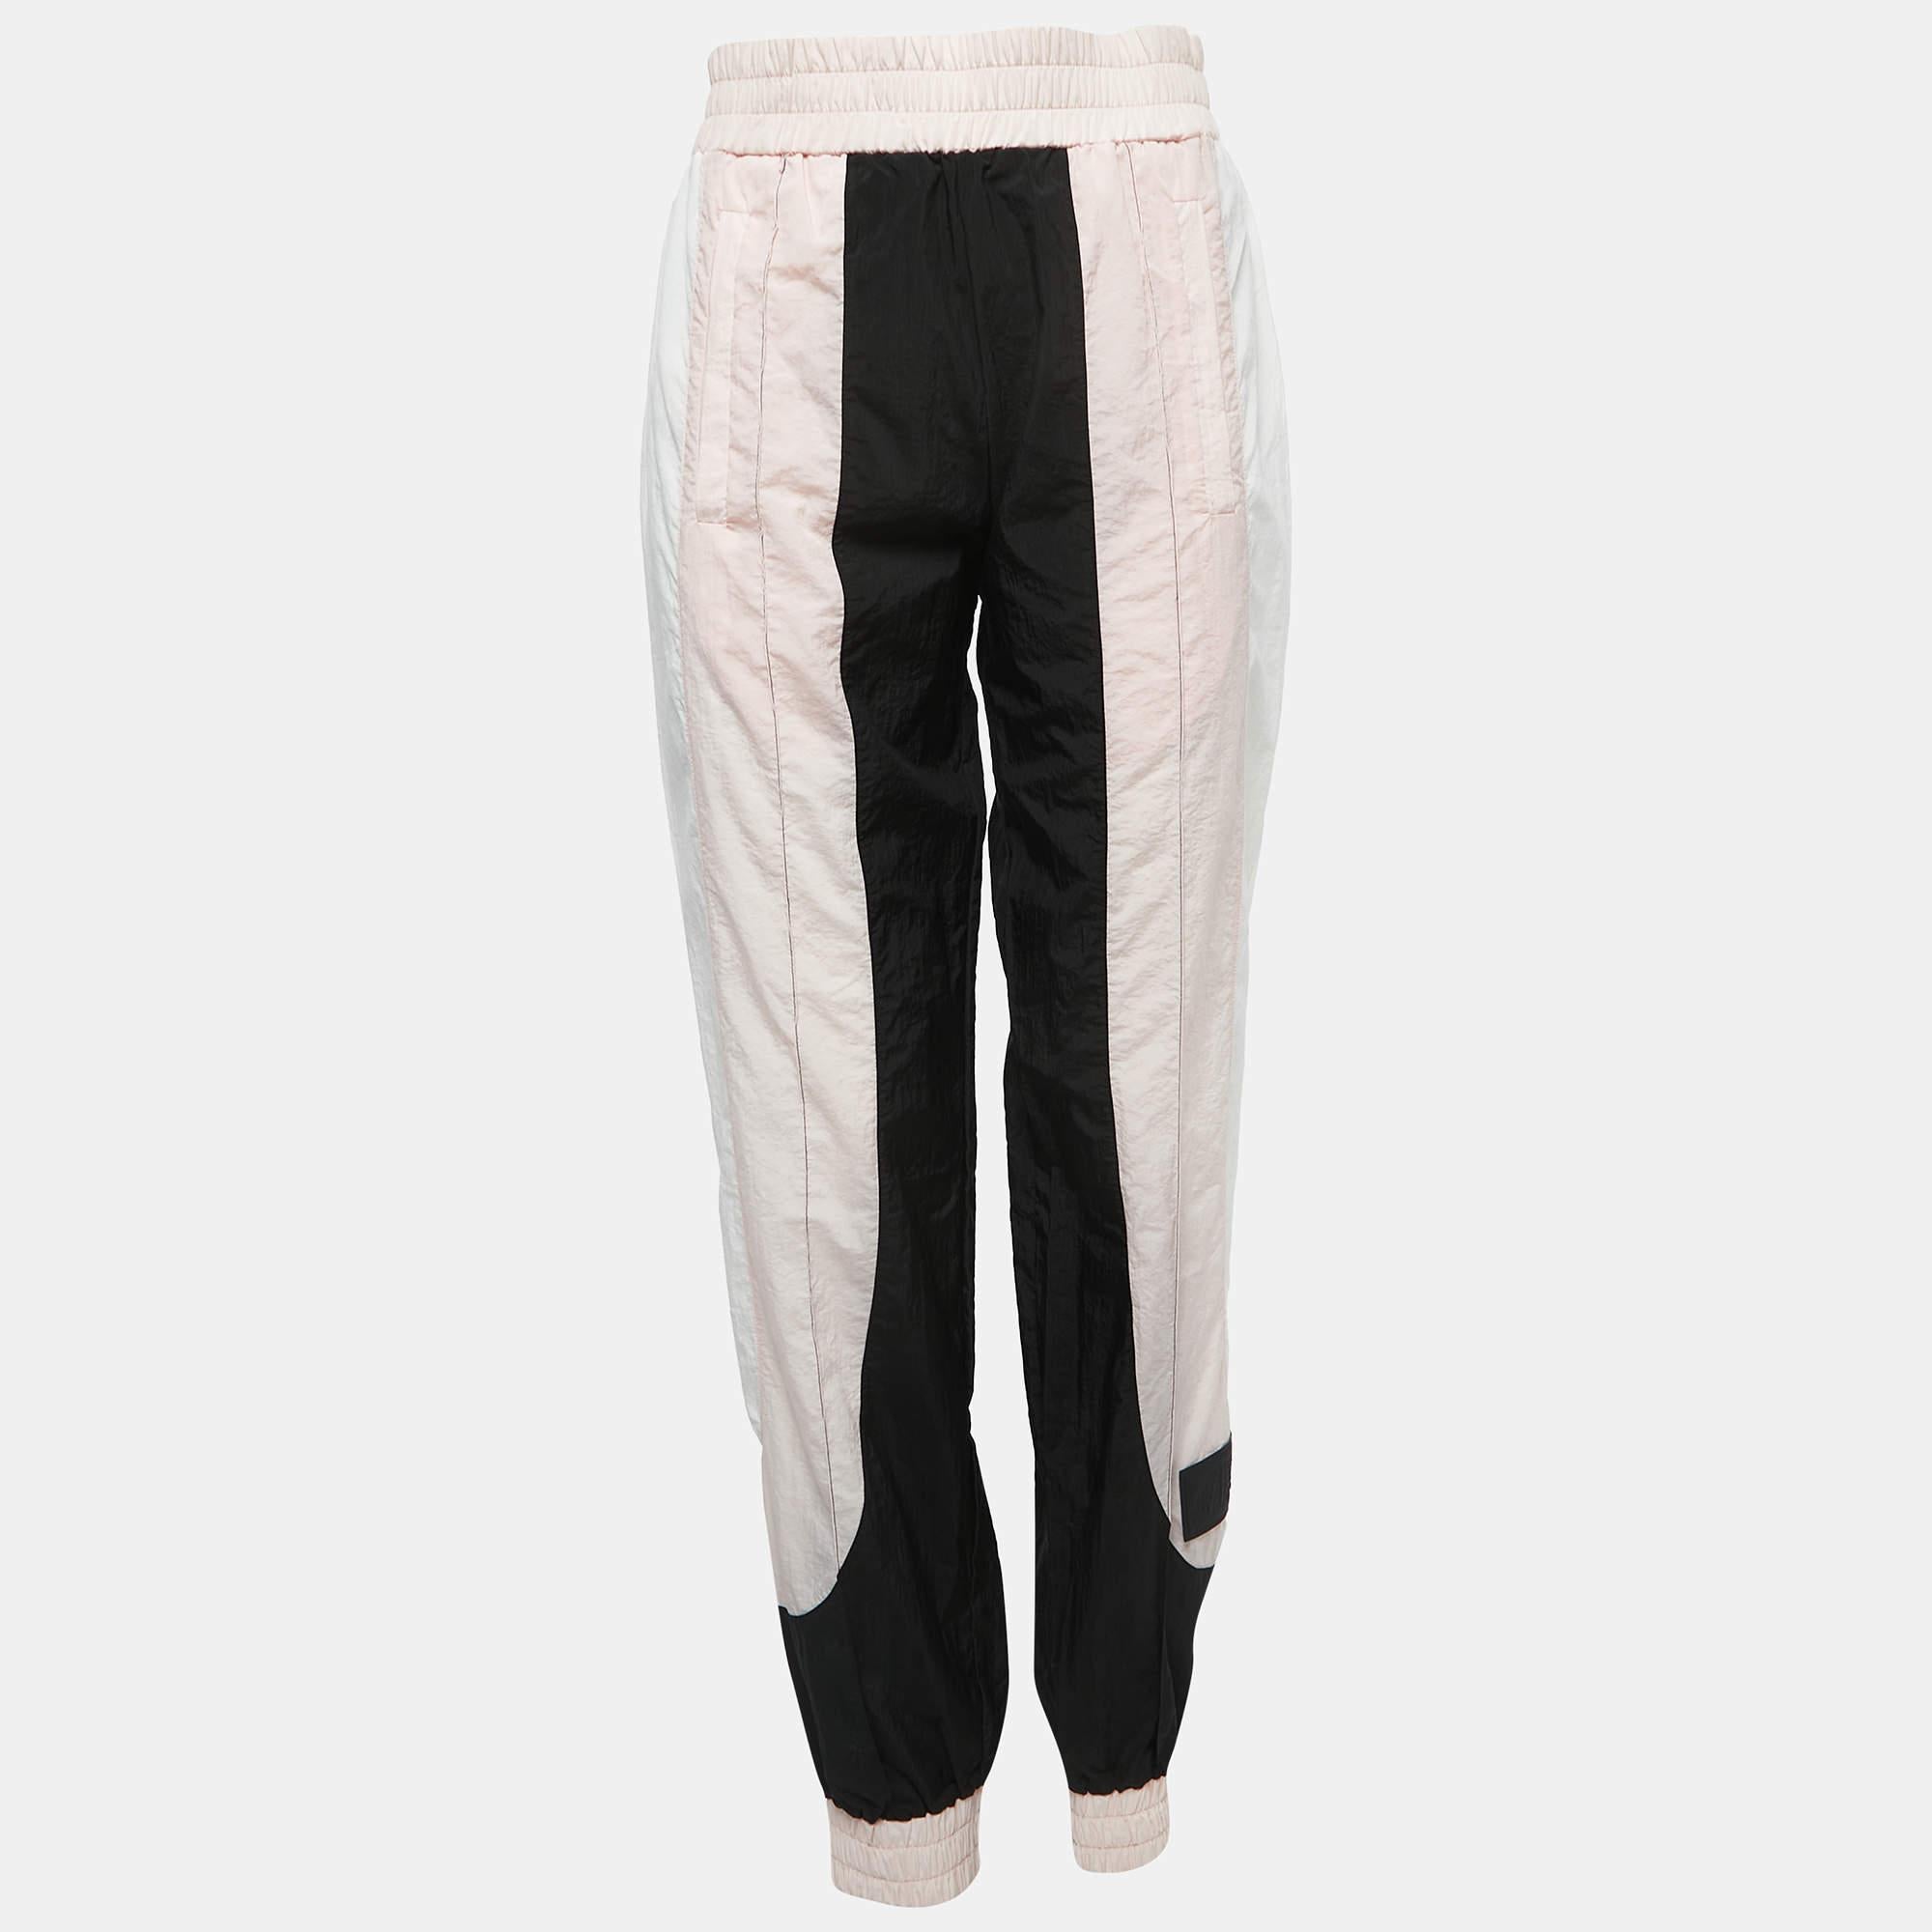 Track pants like these are the best addition to your wardrobe. They are made from great fabrics and showcase a superb fit.

